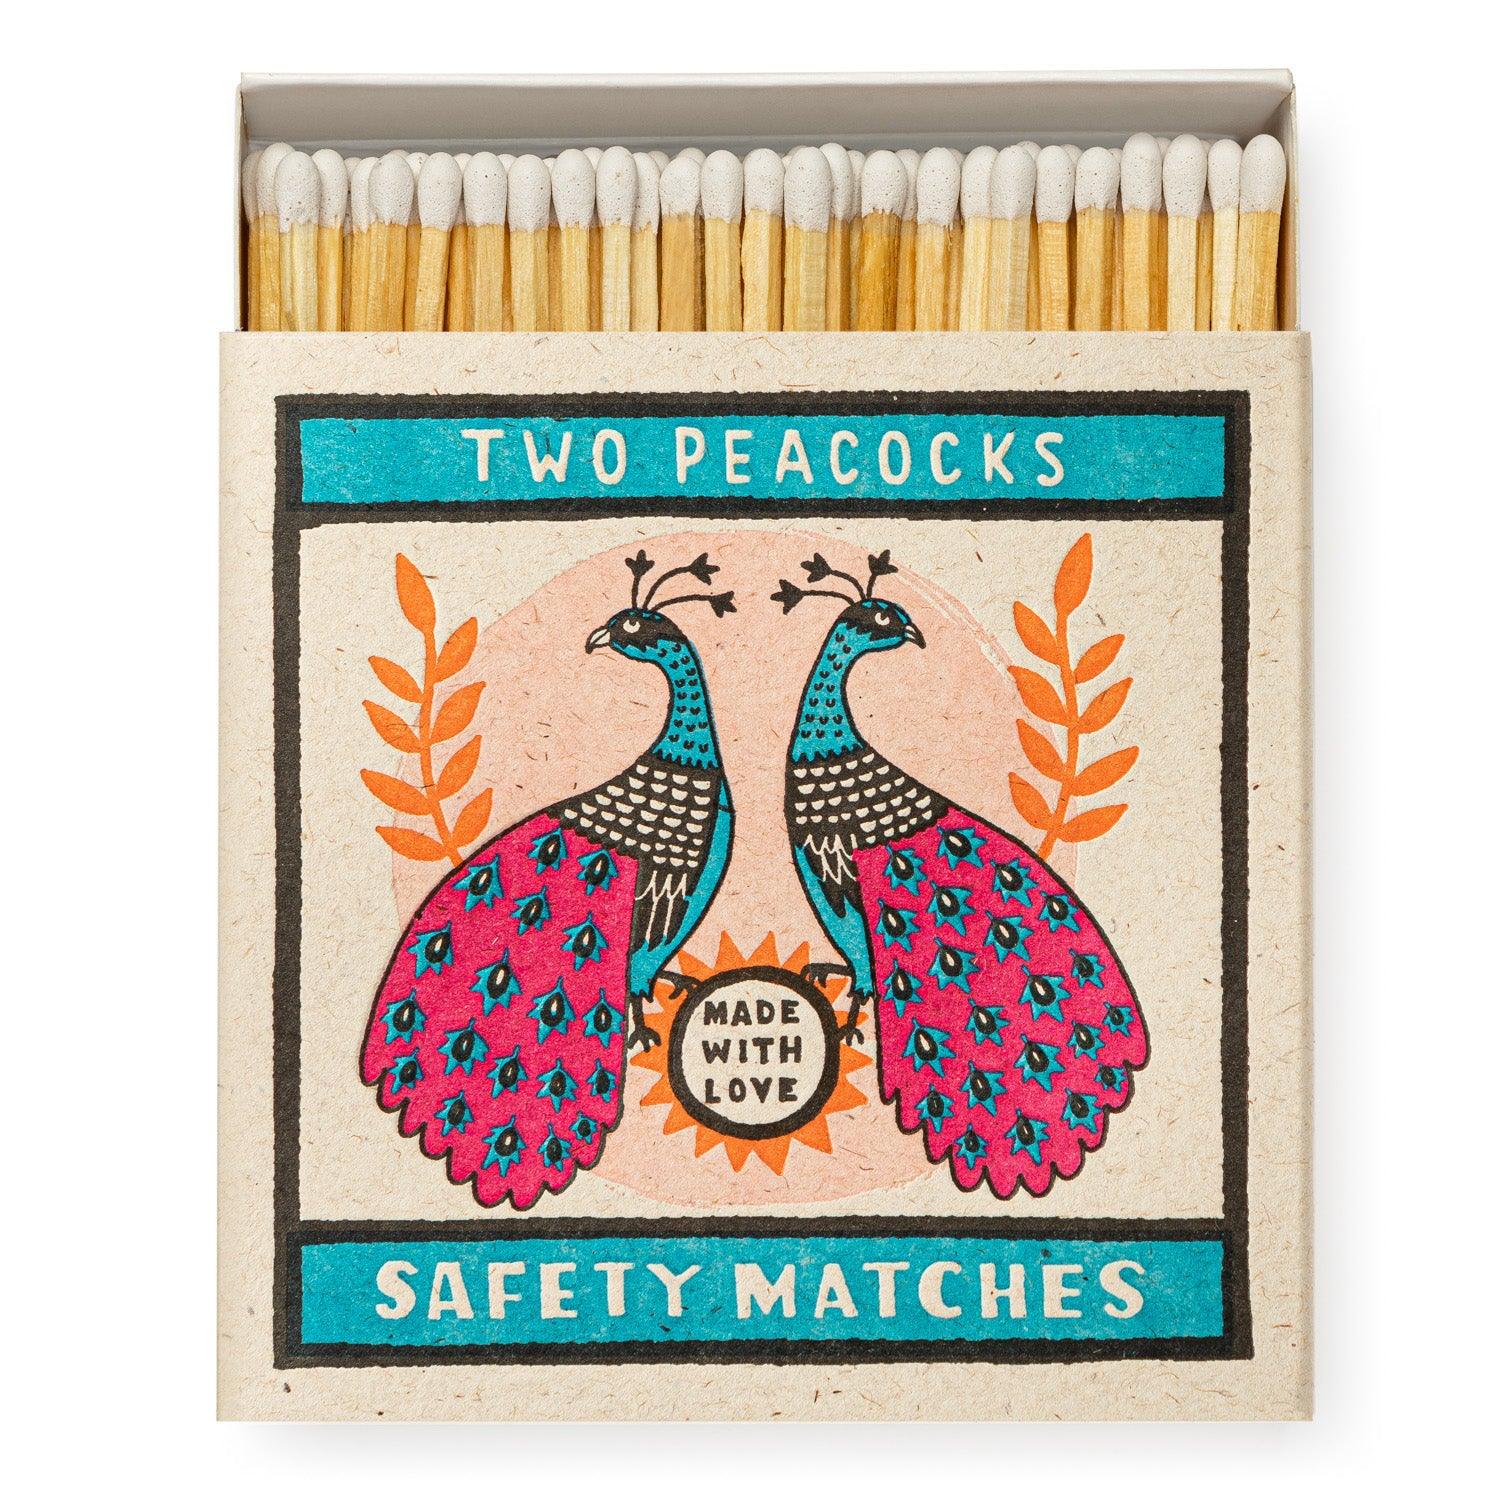 The Fine Matchbox Company - Archivist Two Peacocks Match Lucifers - The Candle Club